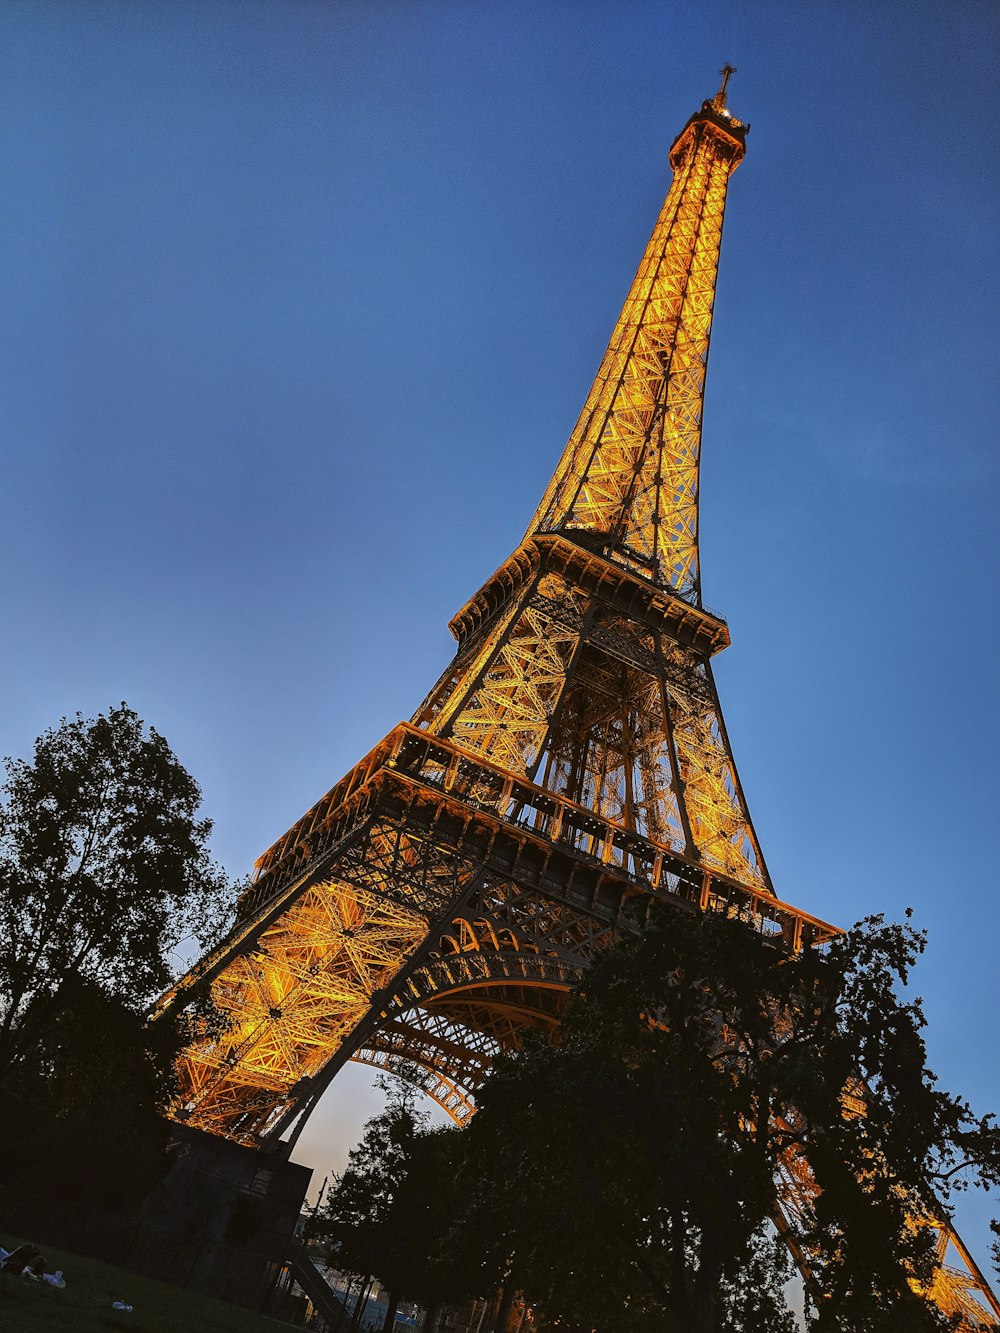 low-angle photography of Eiffel Tower in Paris France during daytime